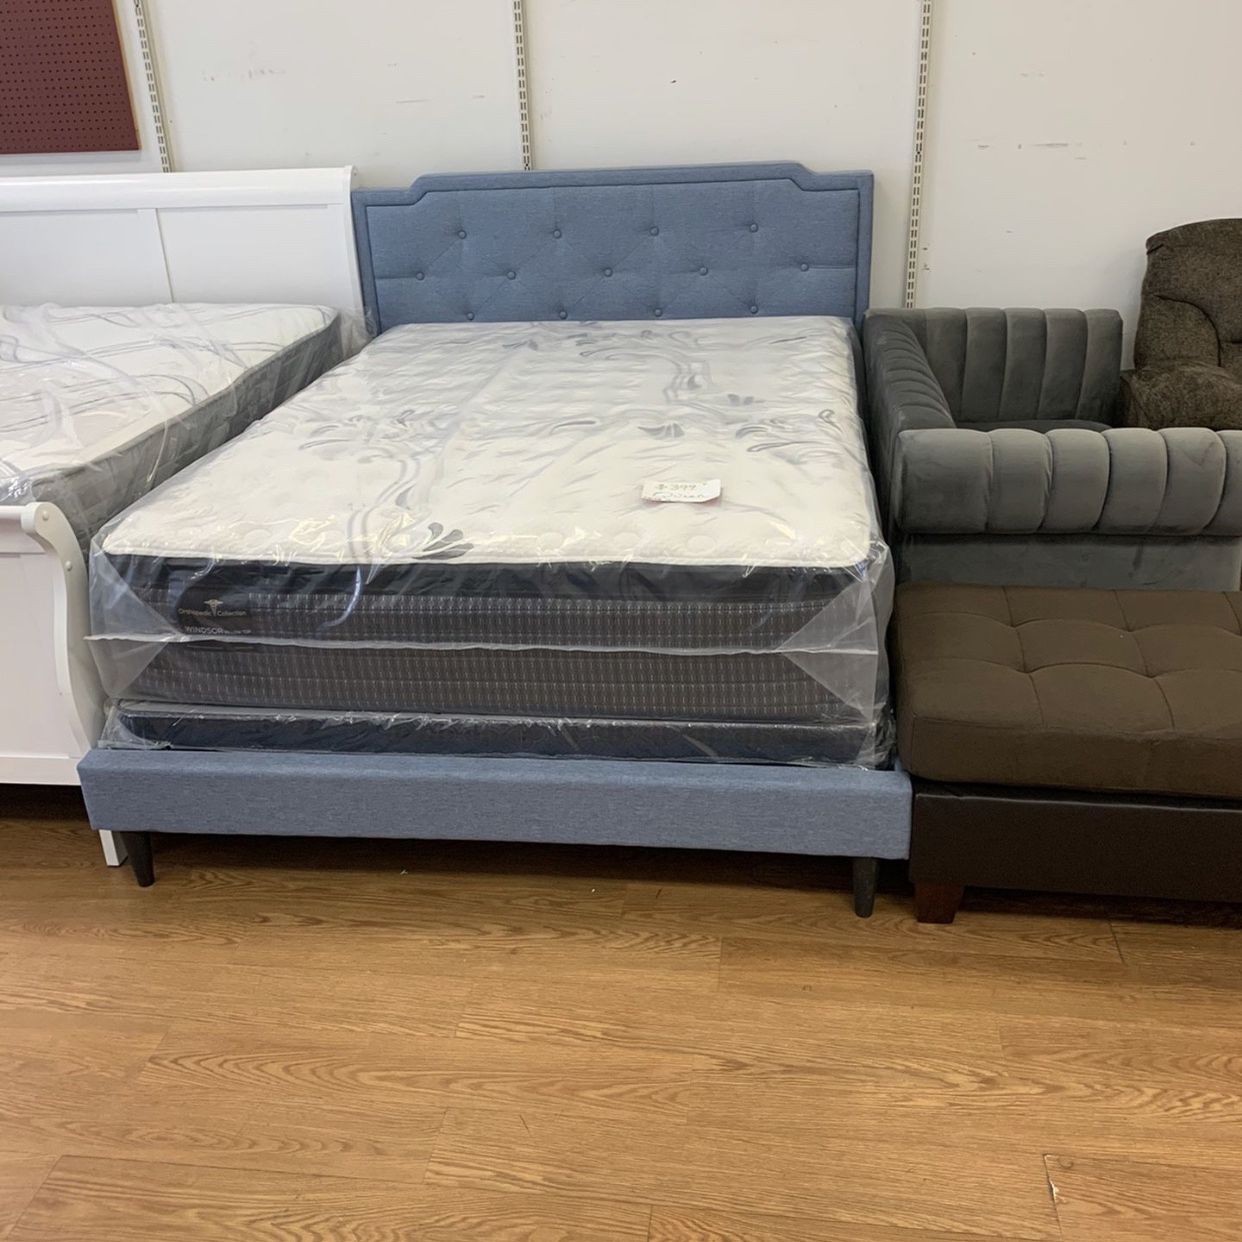 $399 special (bed frame + orthopedic mattress)